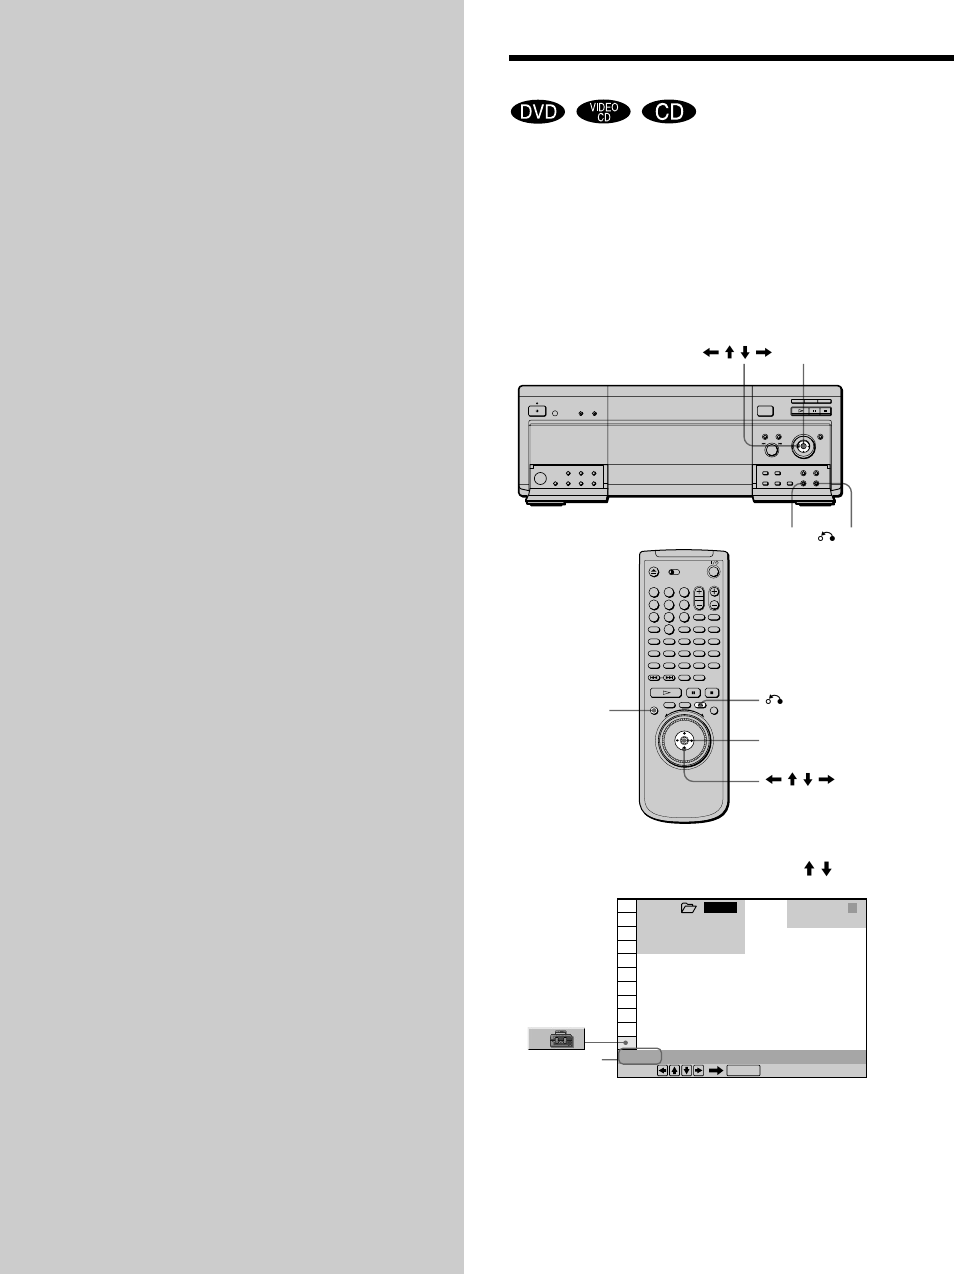 Settings and adjustments, Using the setup display | Sony DVP-CX860 User Manual | Page 64 / 96